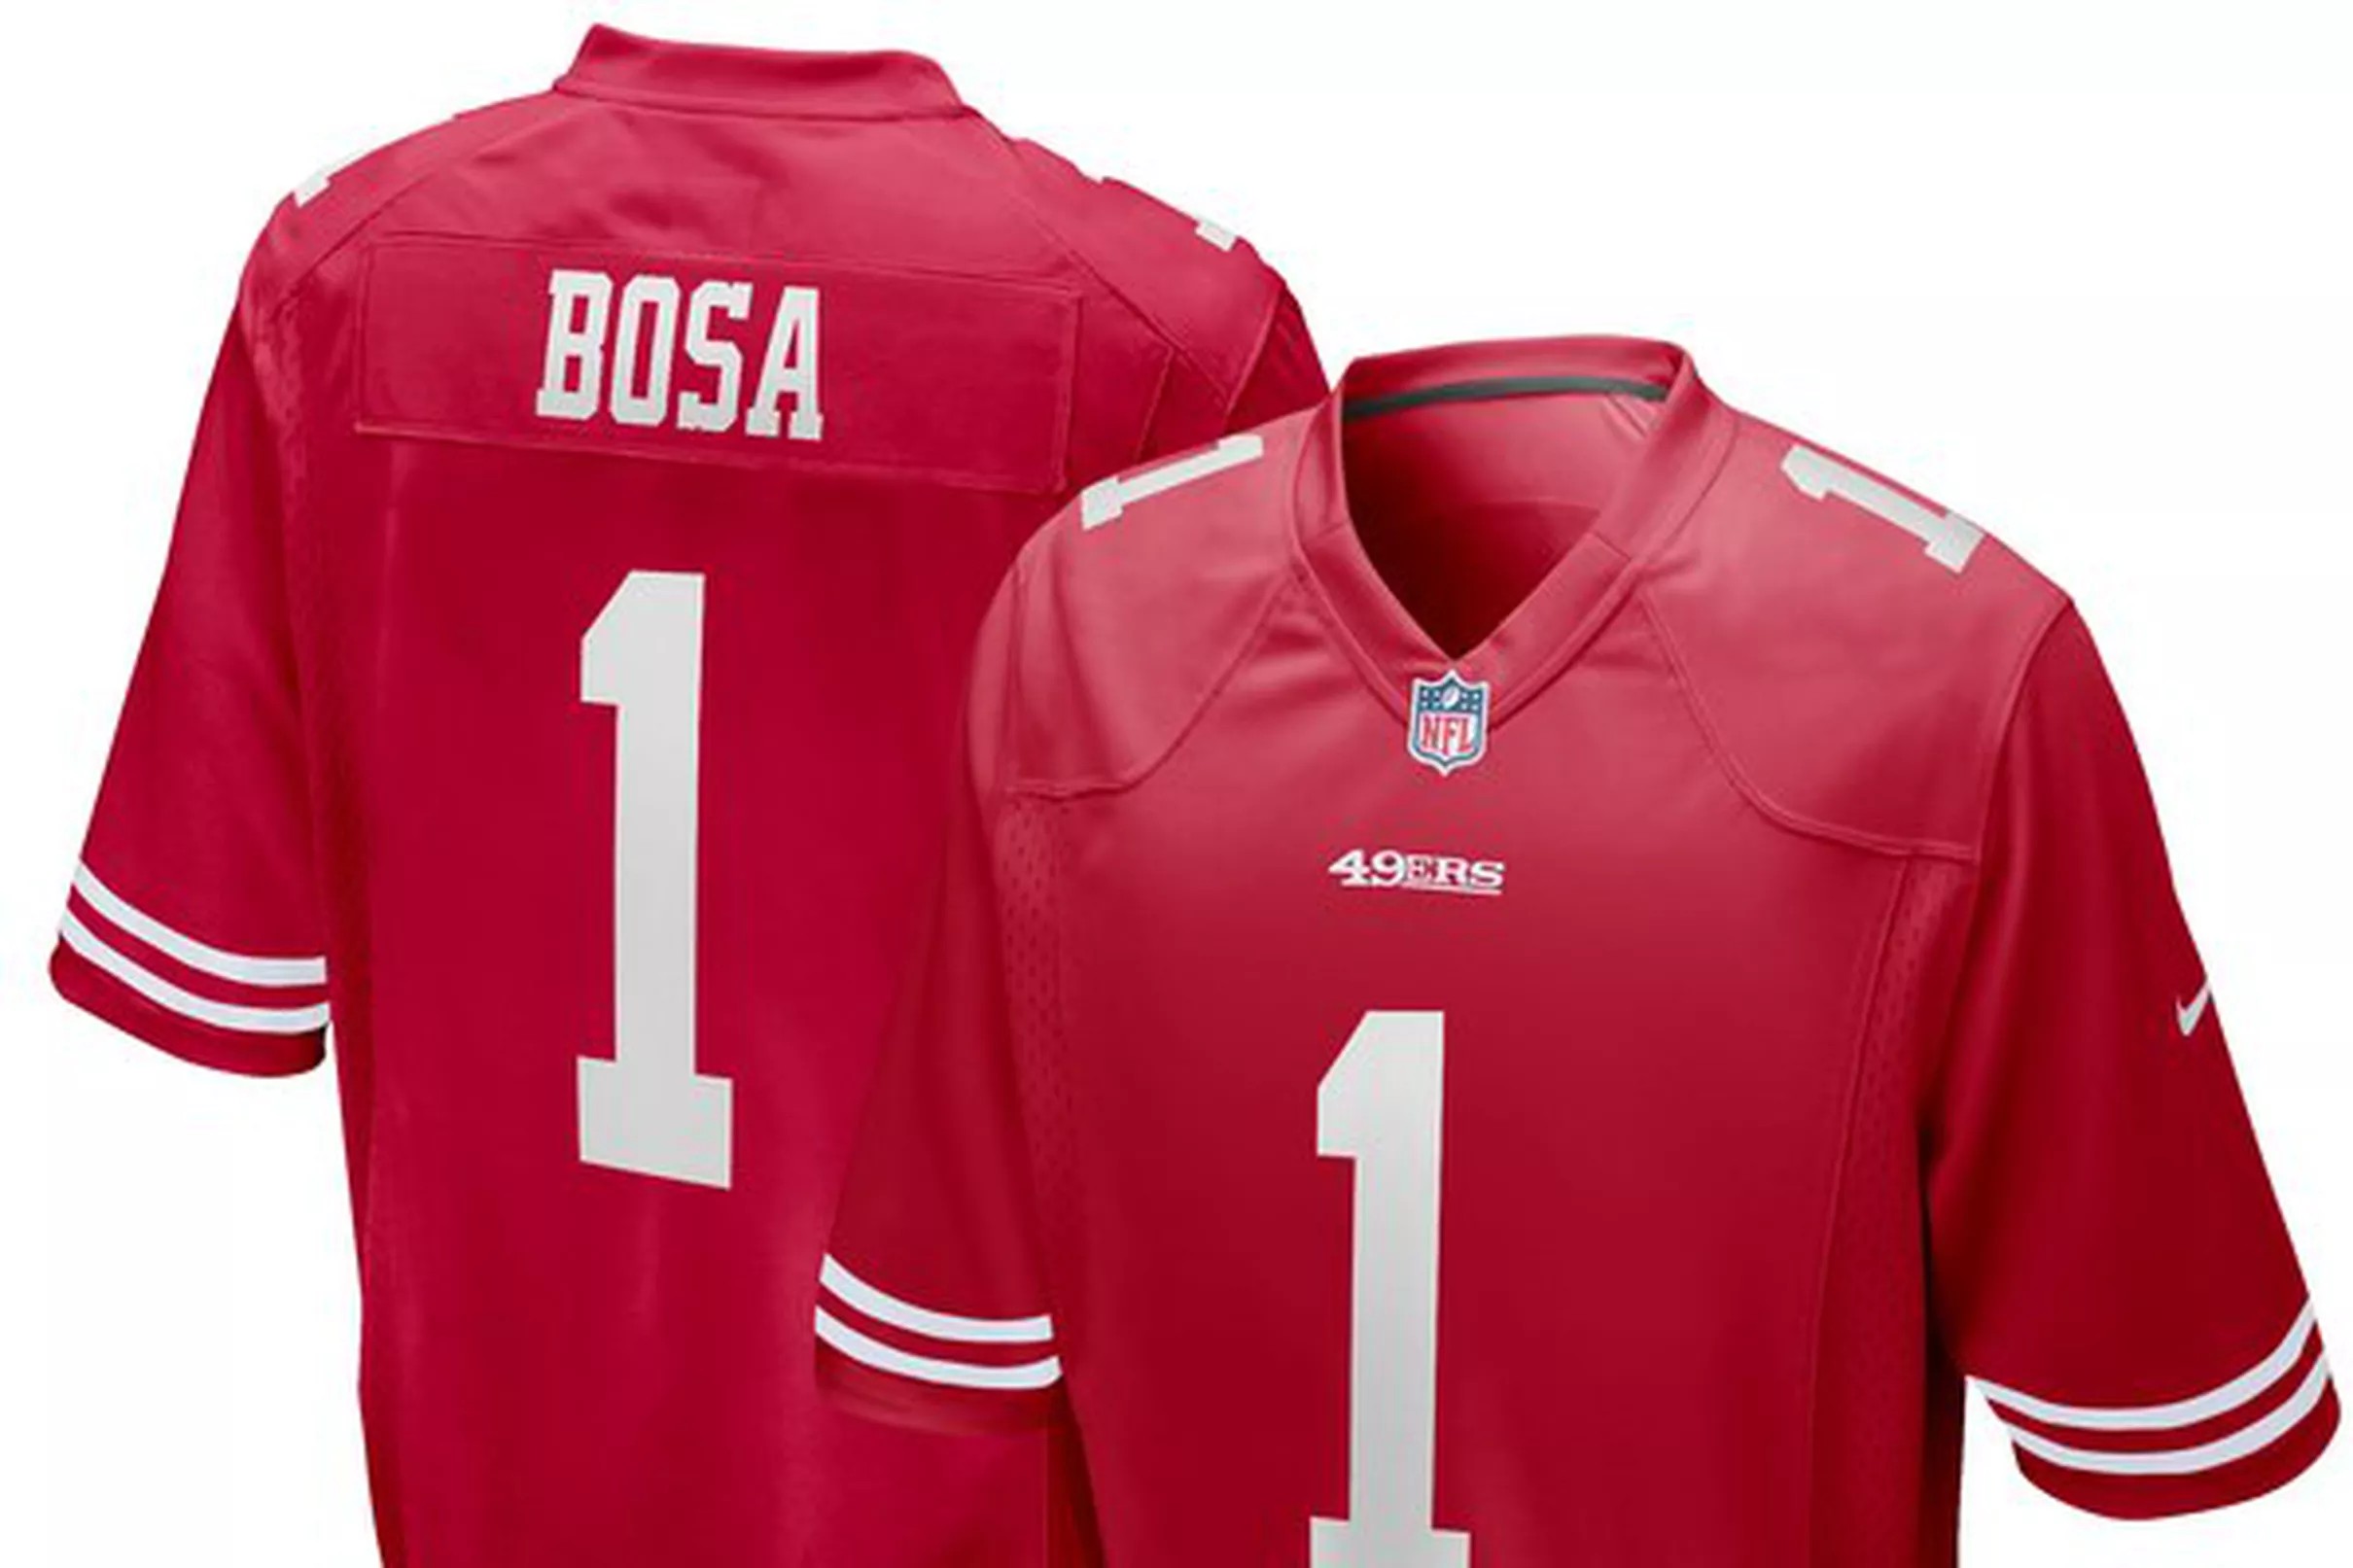 How to buy a Nick Bosa 49ers jersey